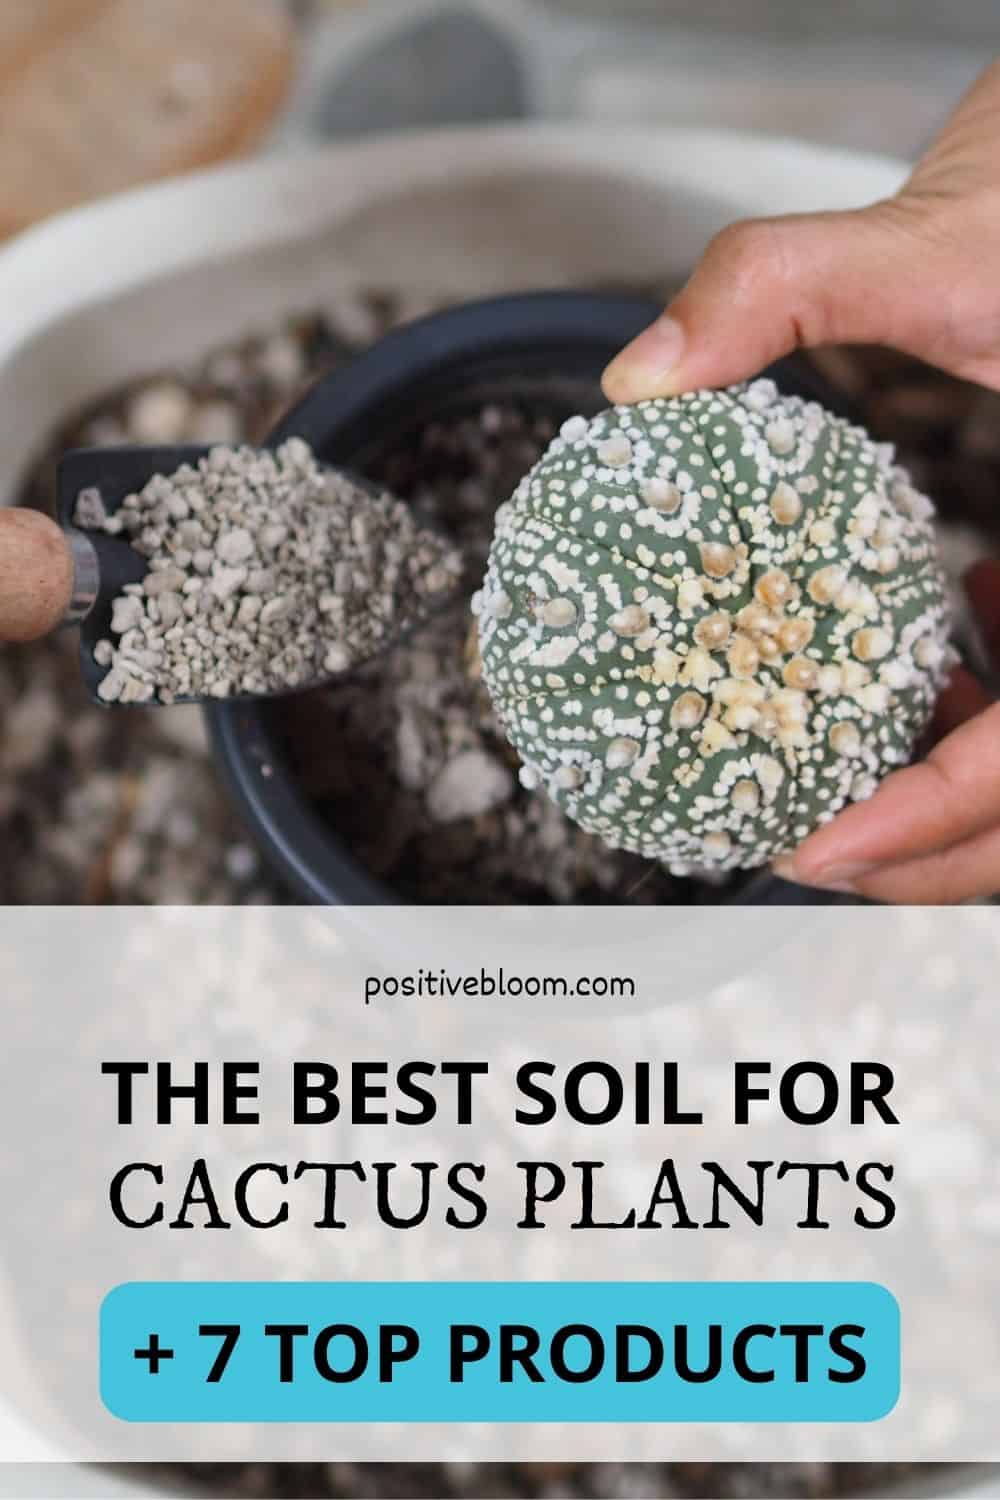 The Best Soil For Cactus Plants + 7 Top Products Pinterest